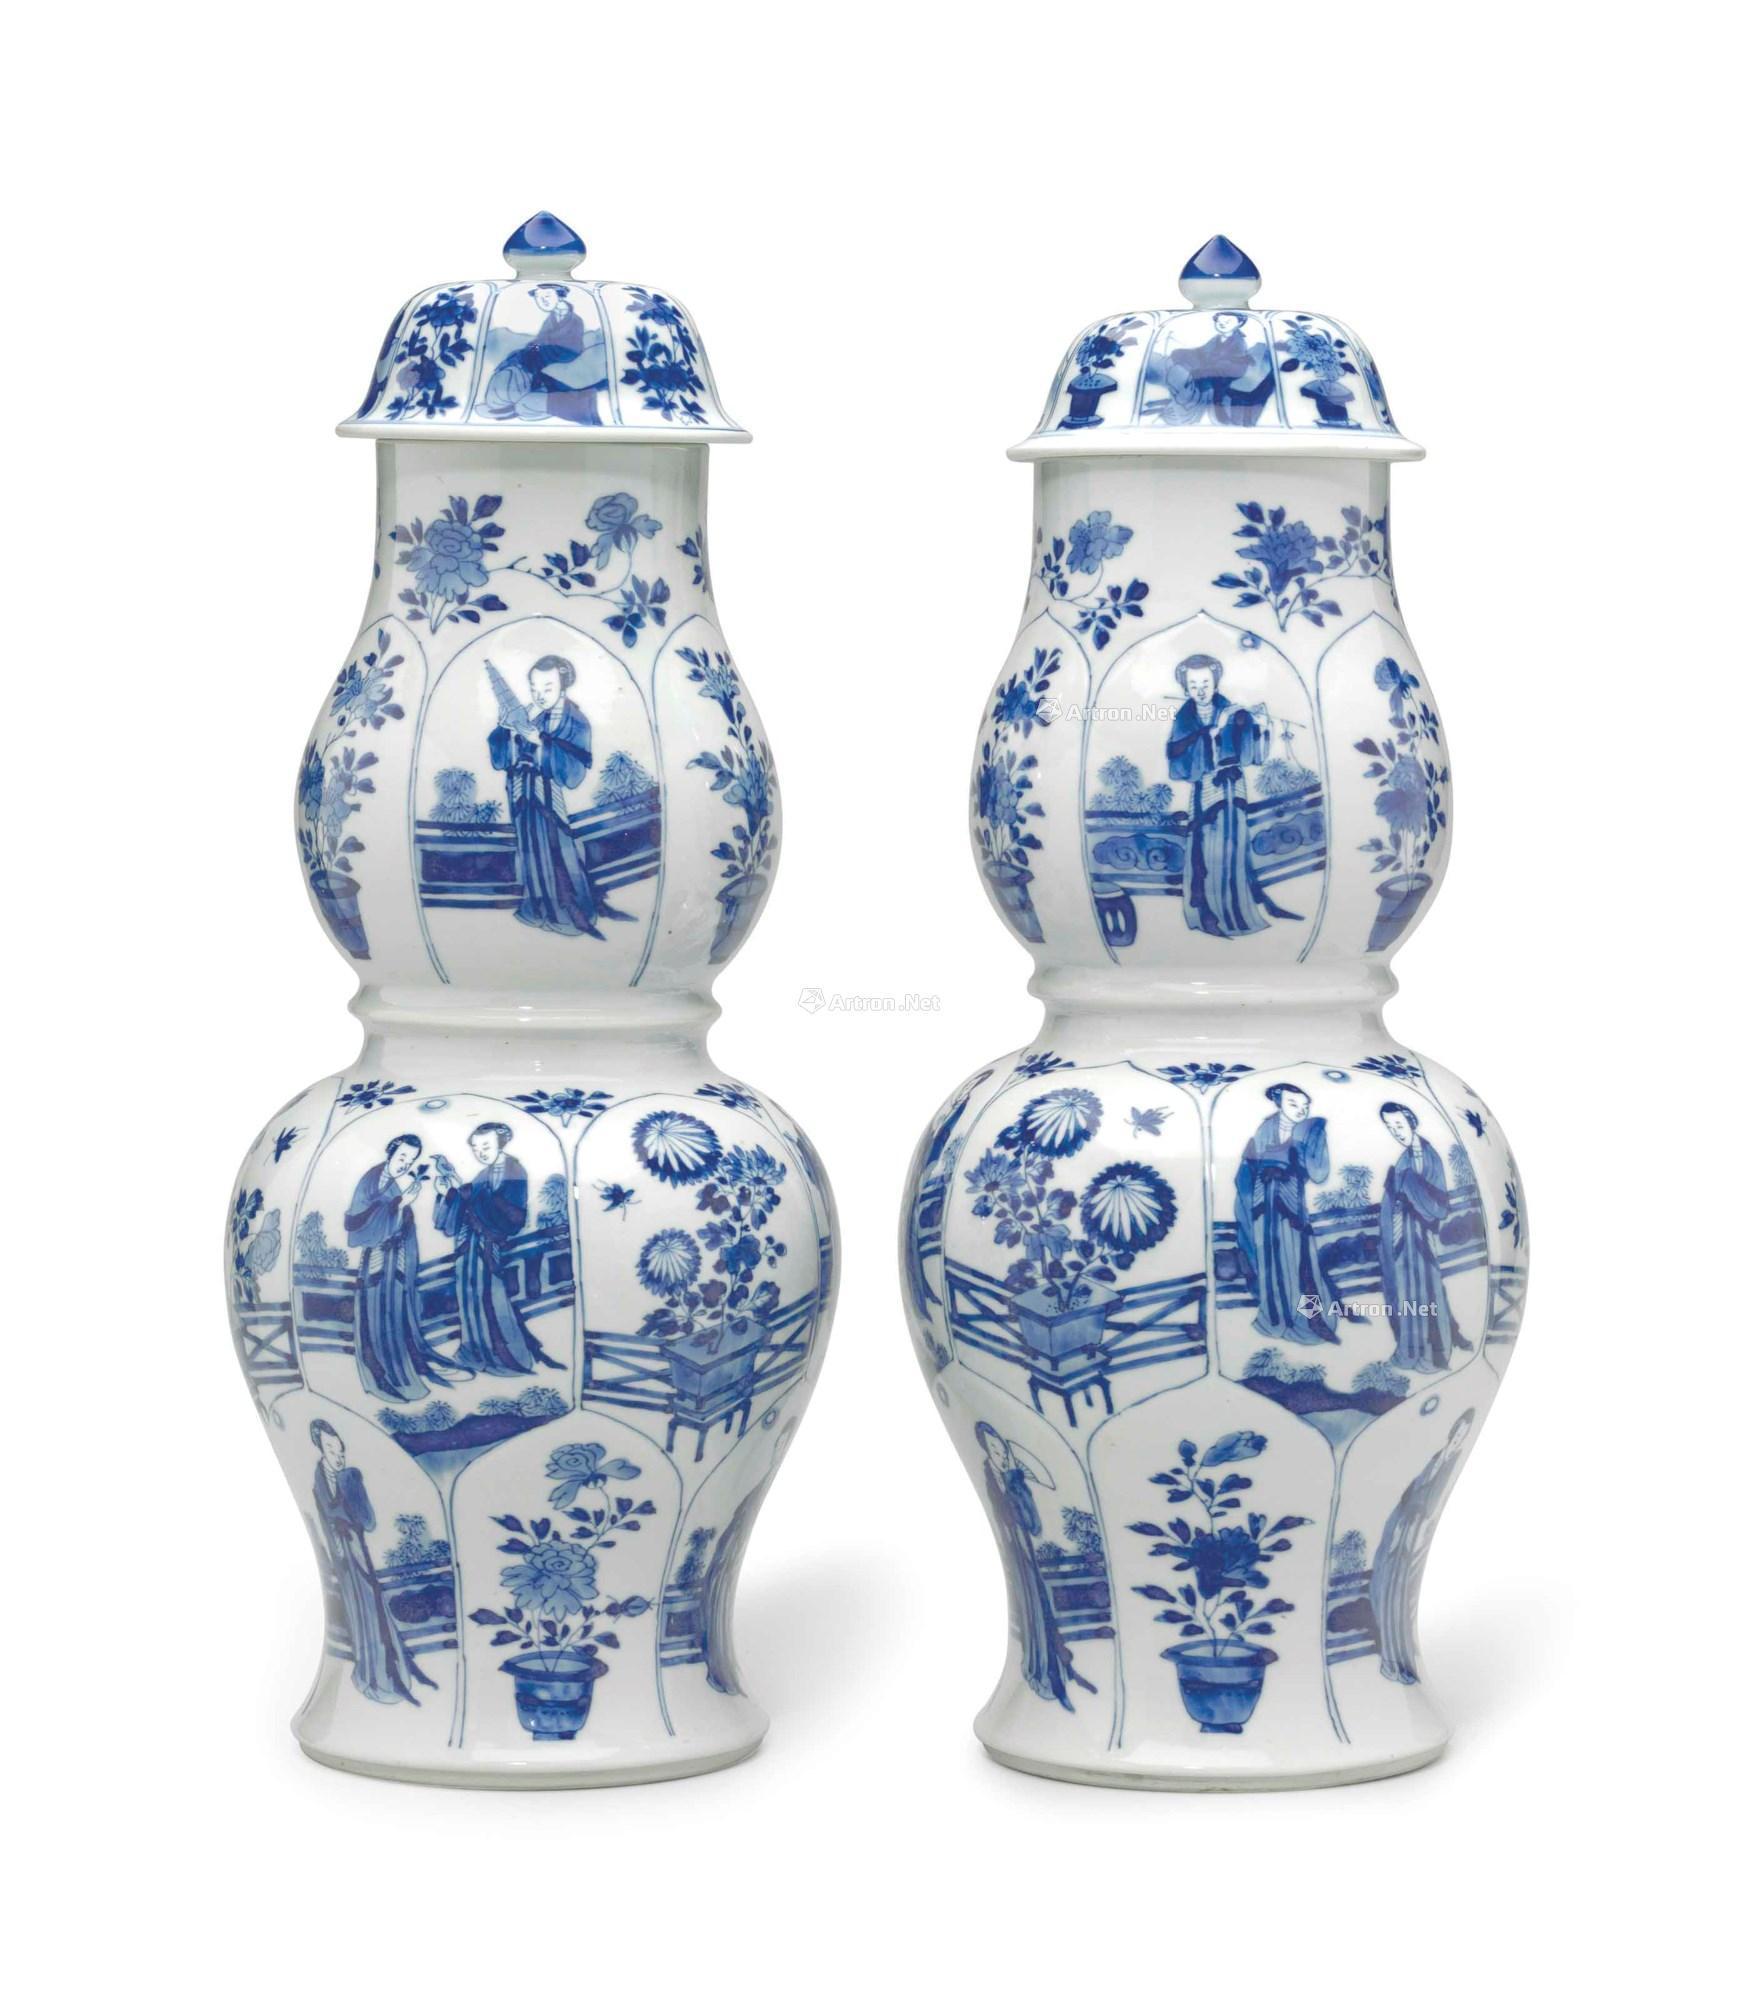 Kangxi period, 1662-1722, A LARGE PAIR OF BLUE AND WHITE MOLDED DOUBLE GOURD VASES AND COVERS